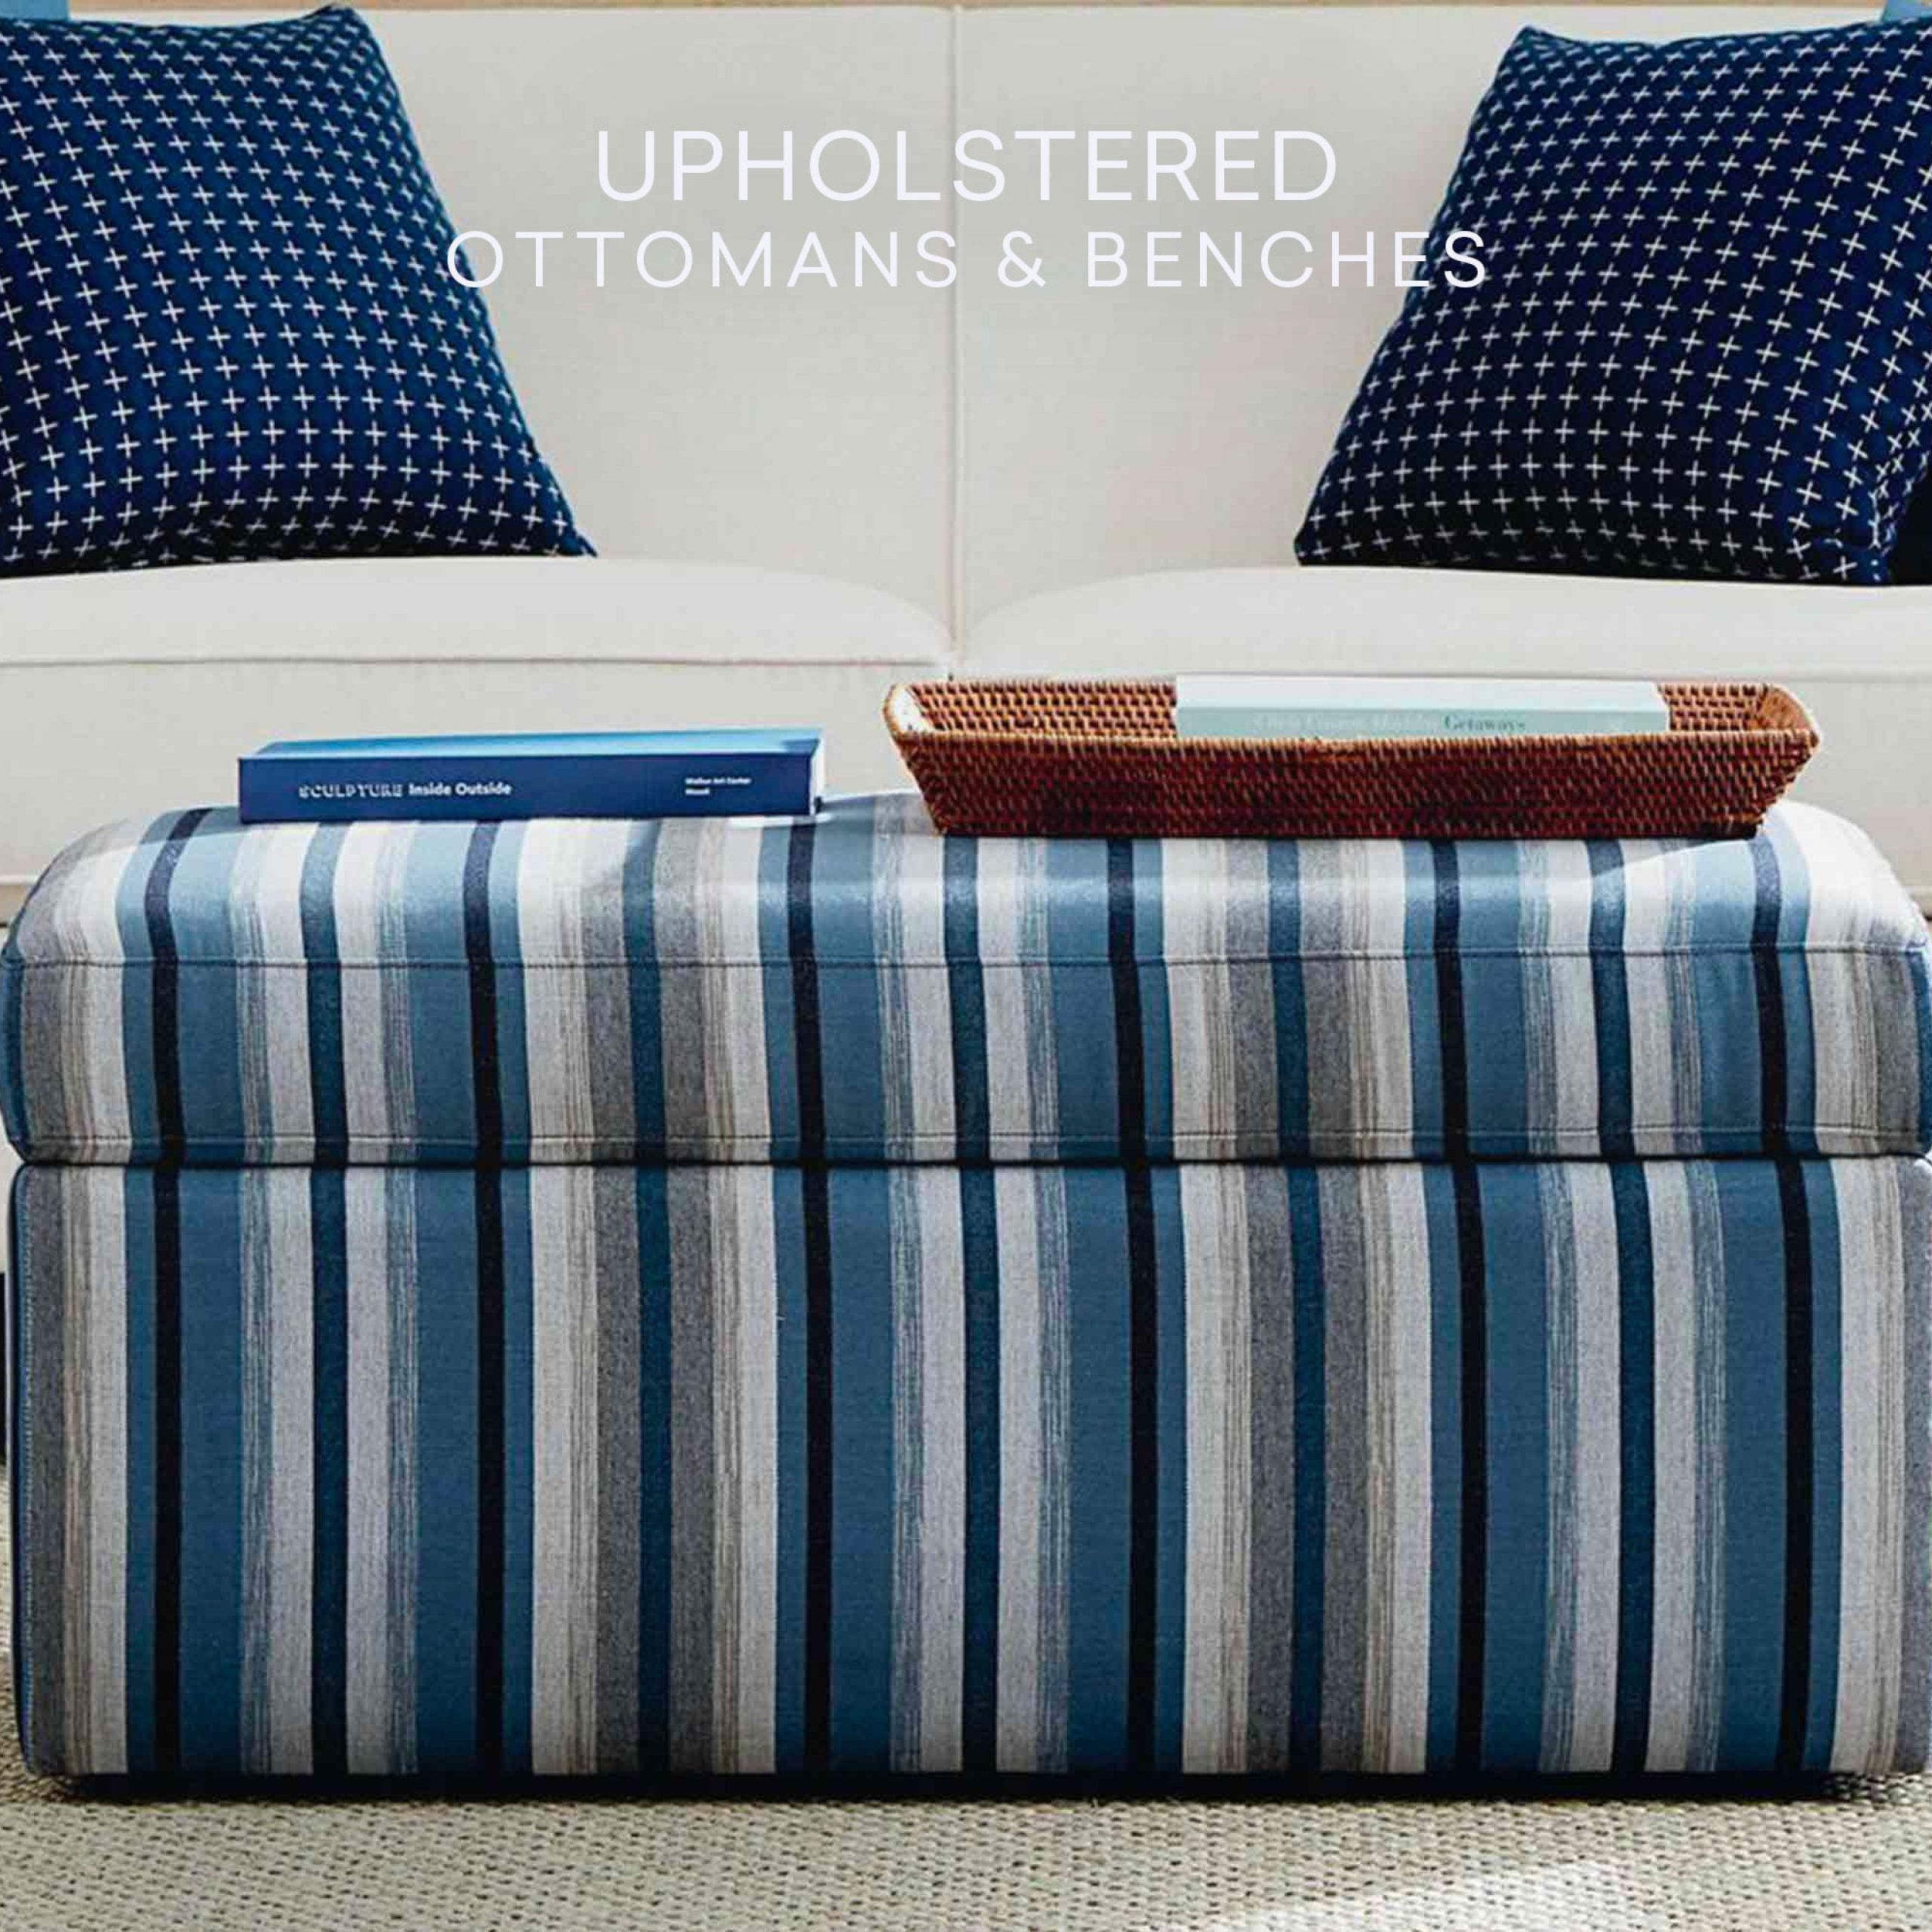 Upholstered Ottomans & Benches | Bassett Furniture In Fabric Upholstered Ottomans (View 14 of 15)